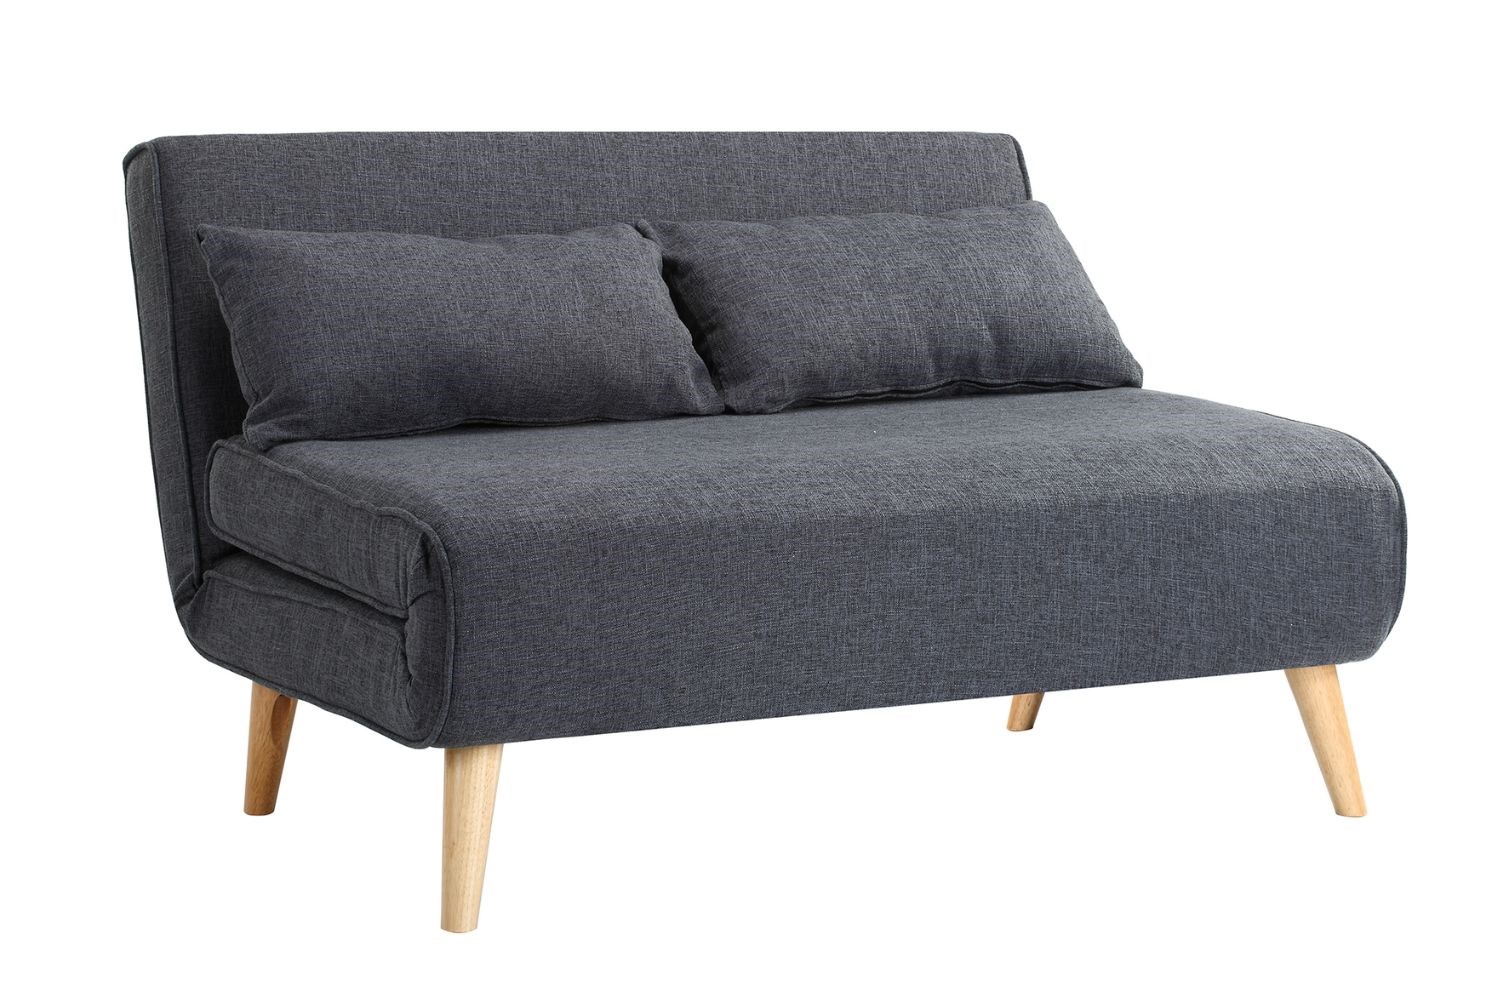 temple and webster sofa bed review